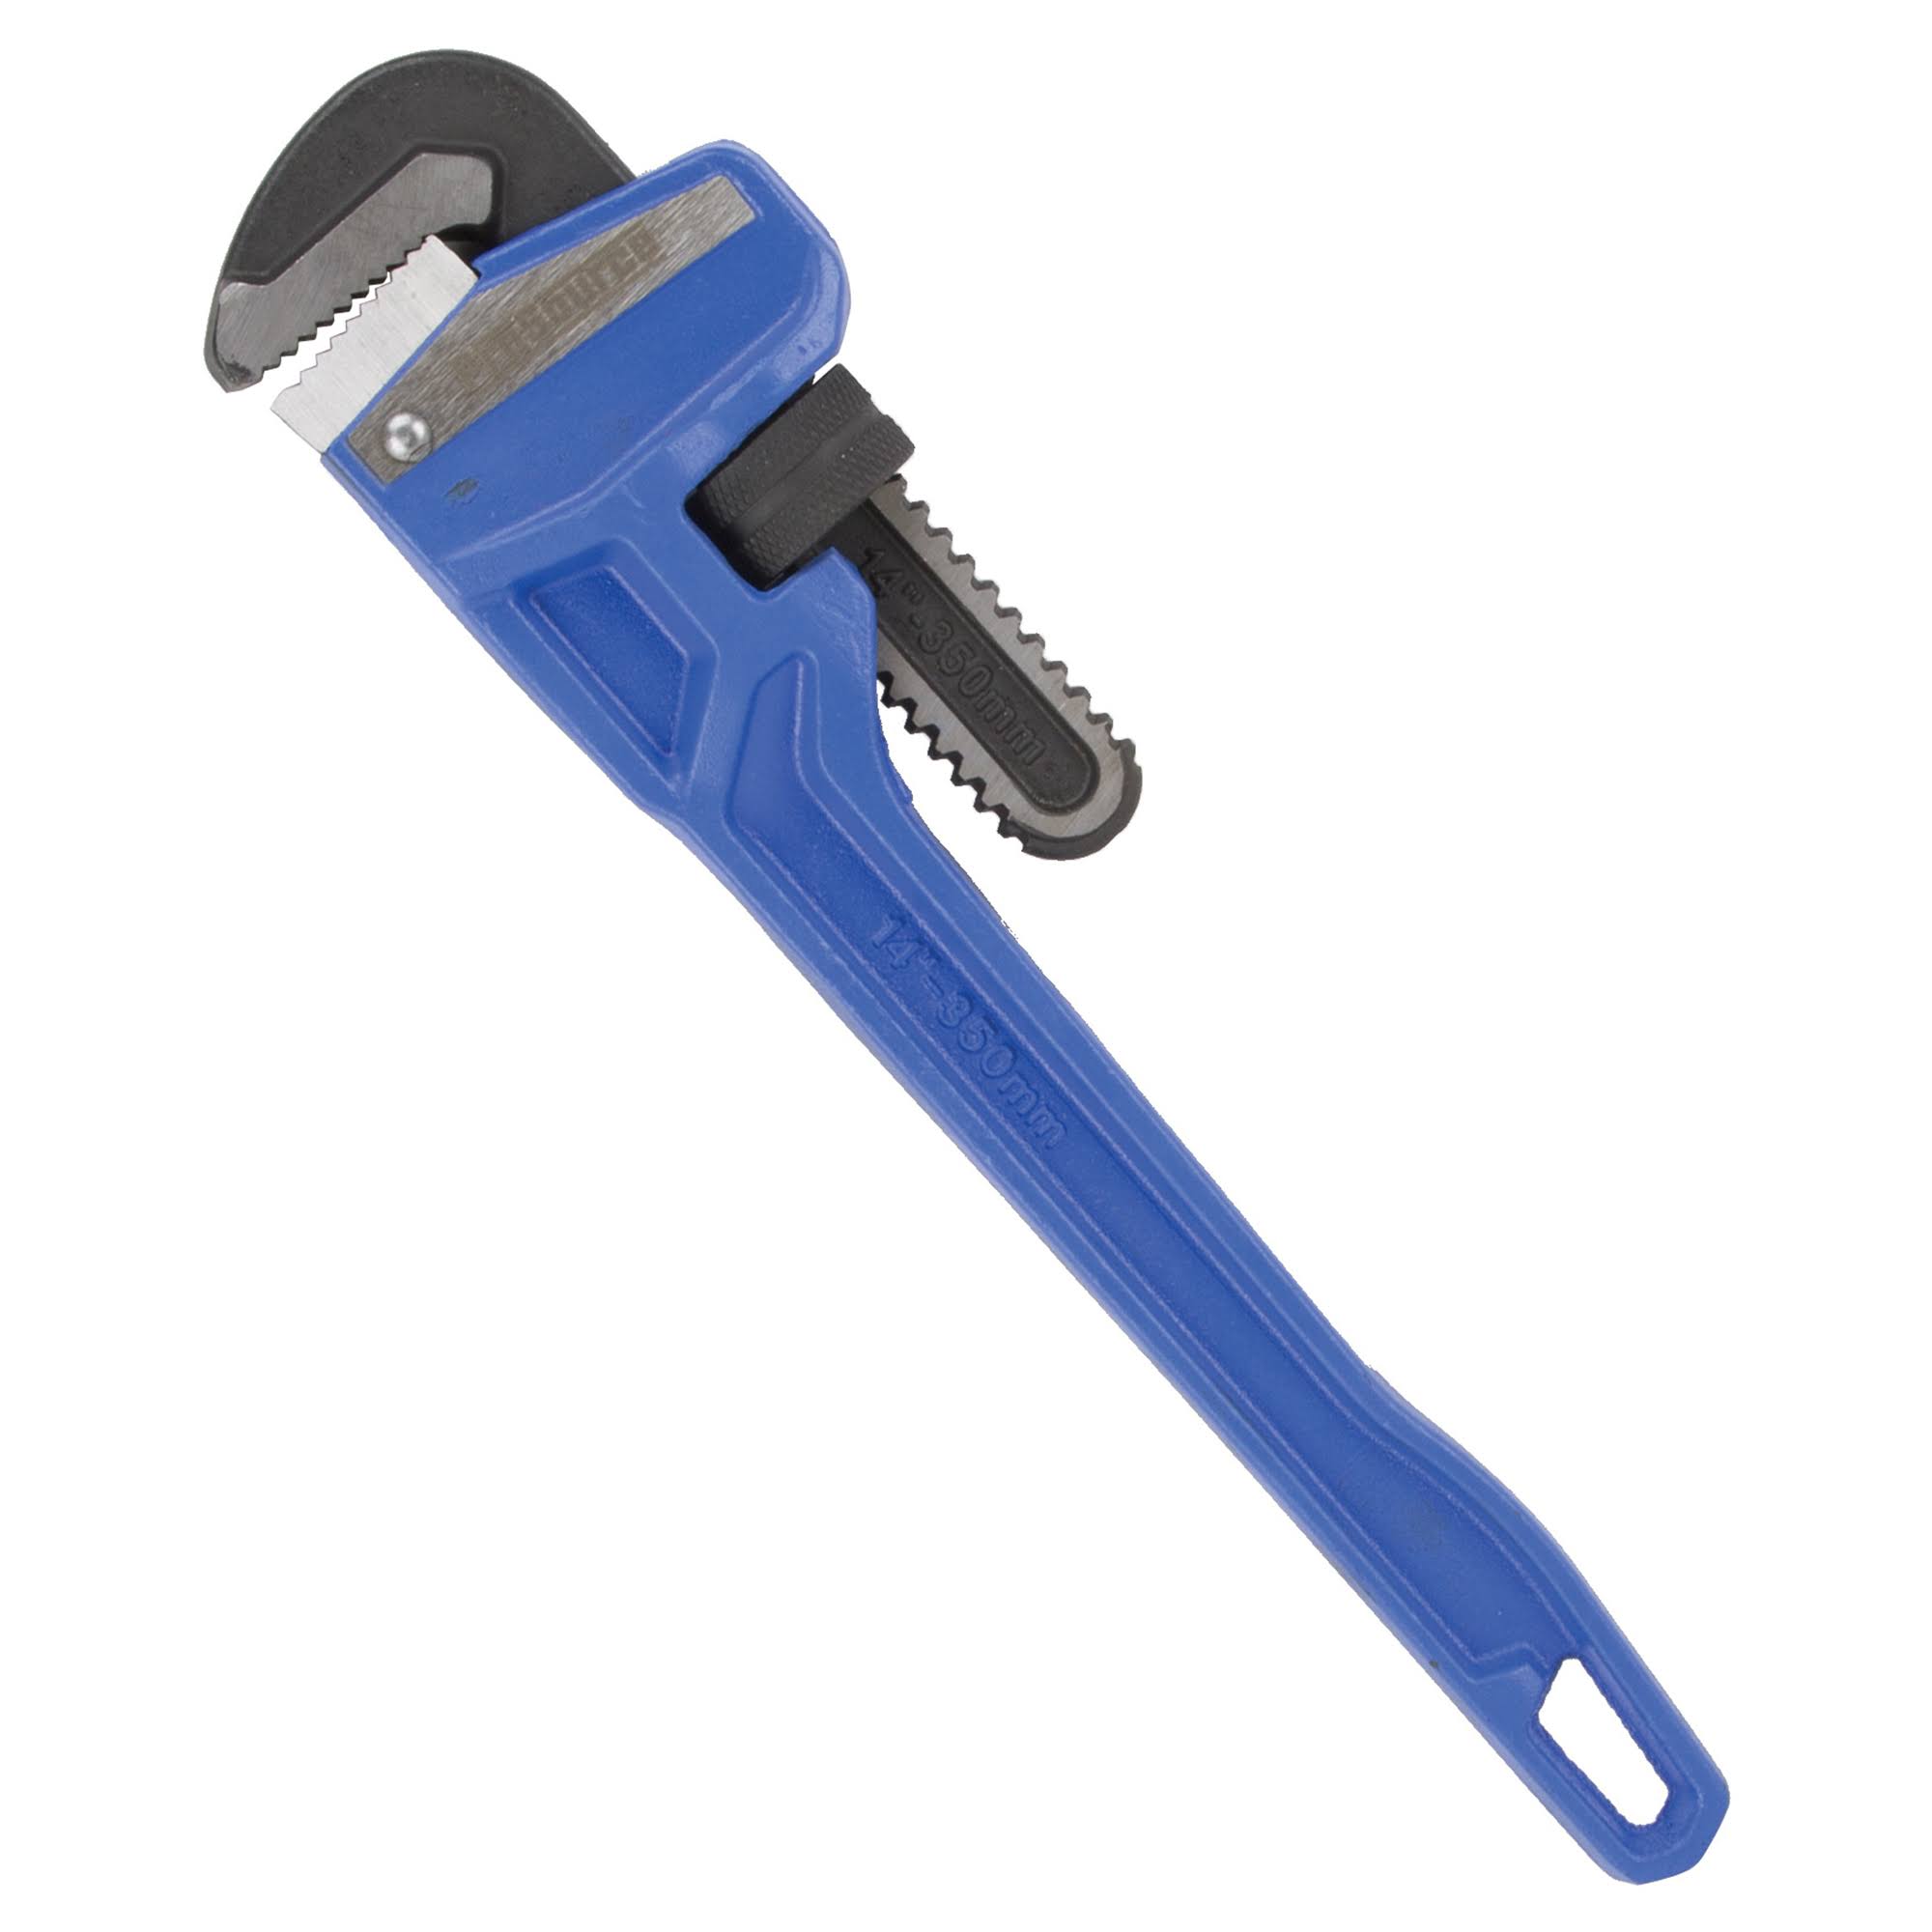 Vulcan JL40114 Pipe Wrench, HD Carbon Steel, 14 in